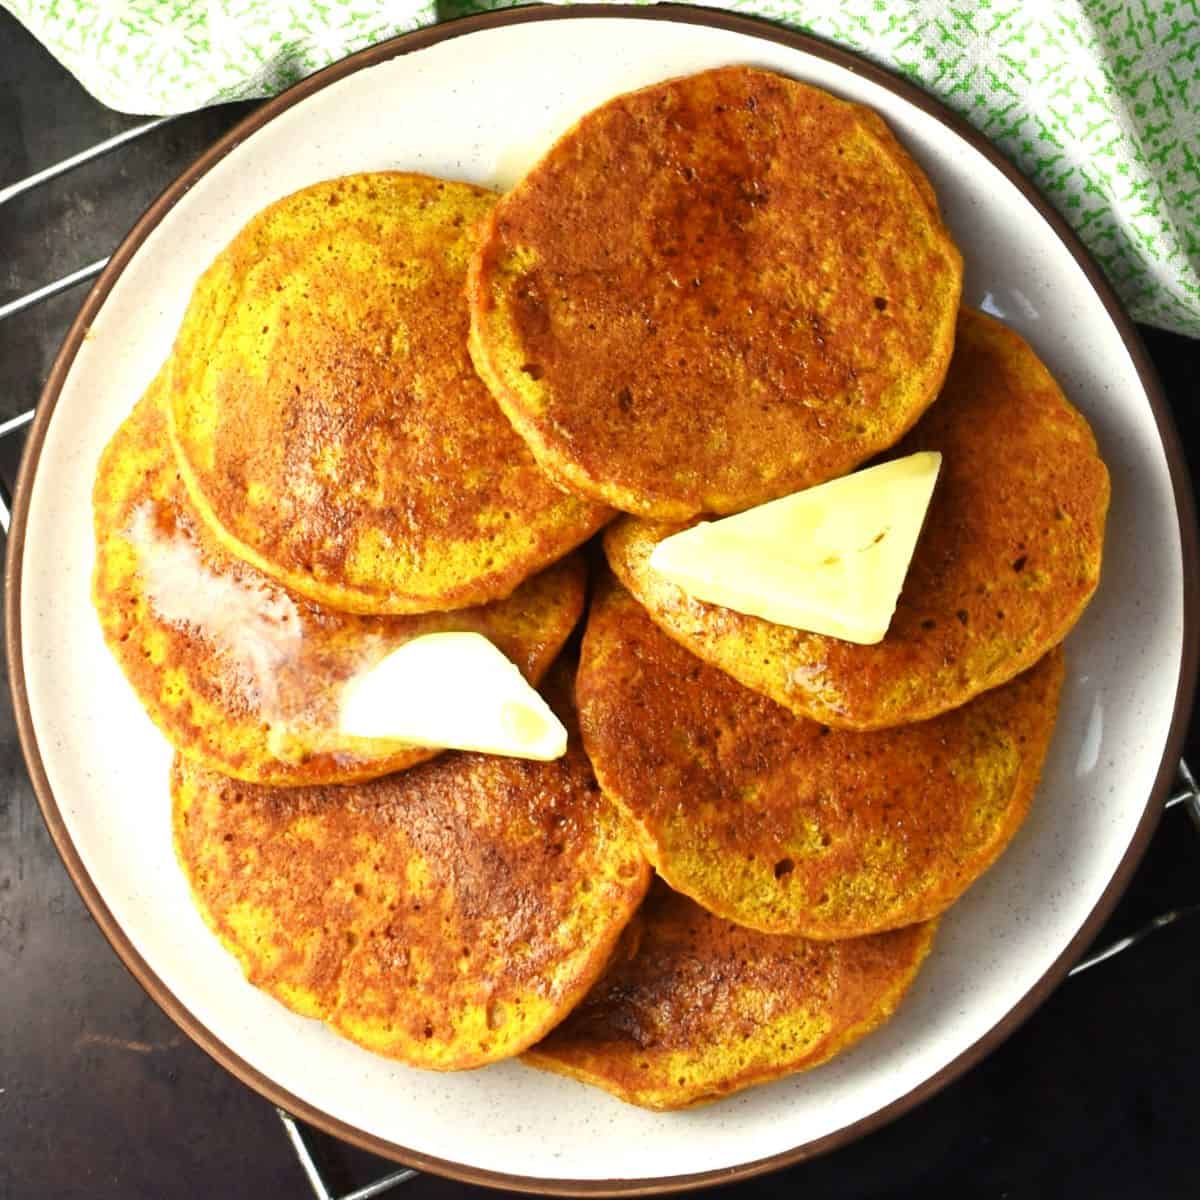 Top down view of lightly browned healthy pumpkin pancakes with knobs of butter and syrup on plate.